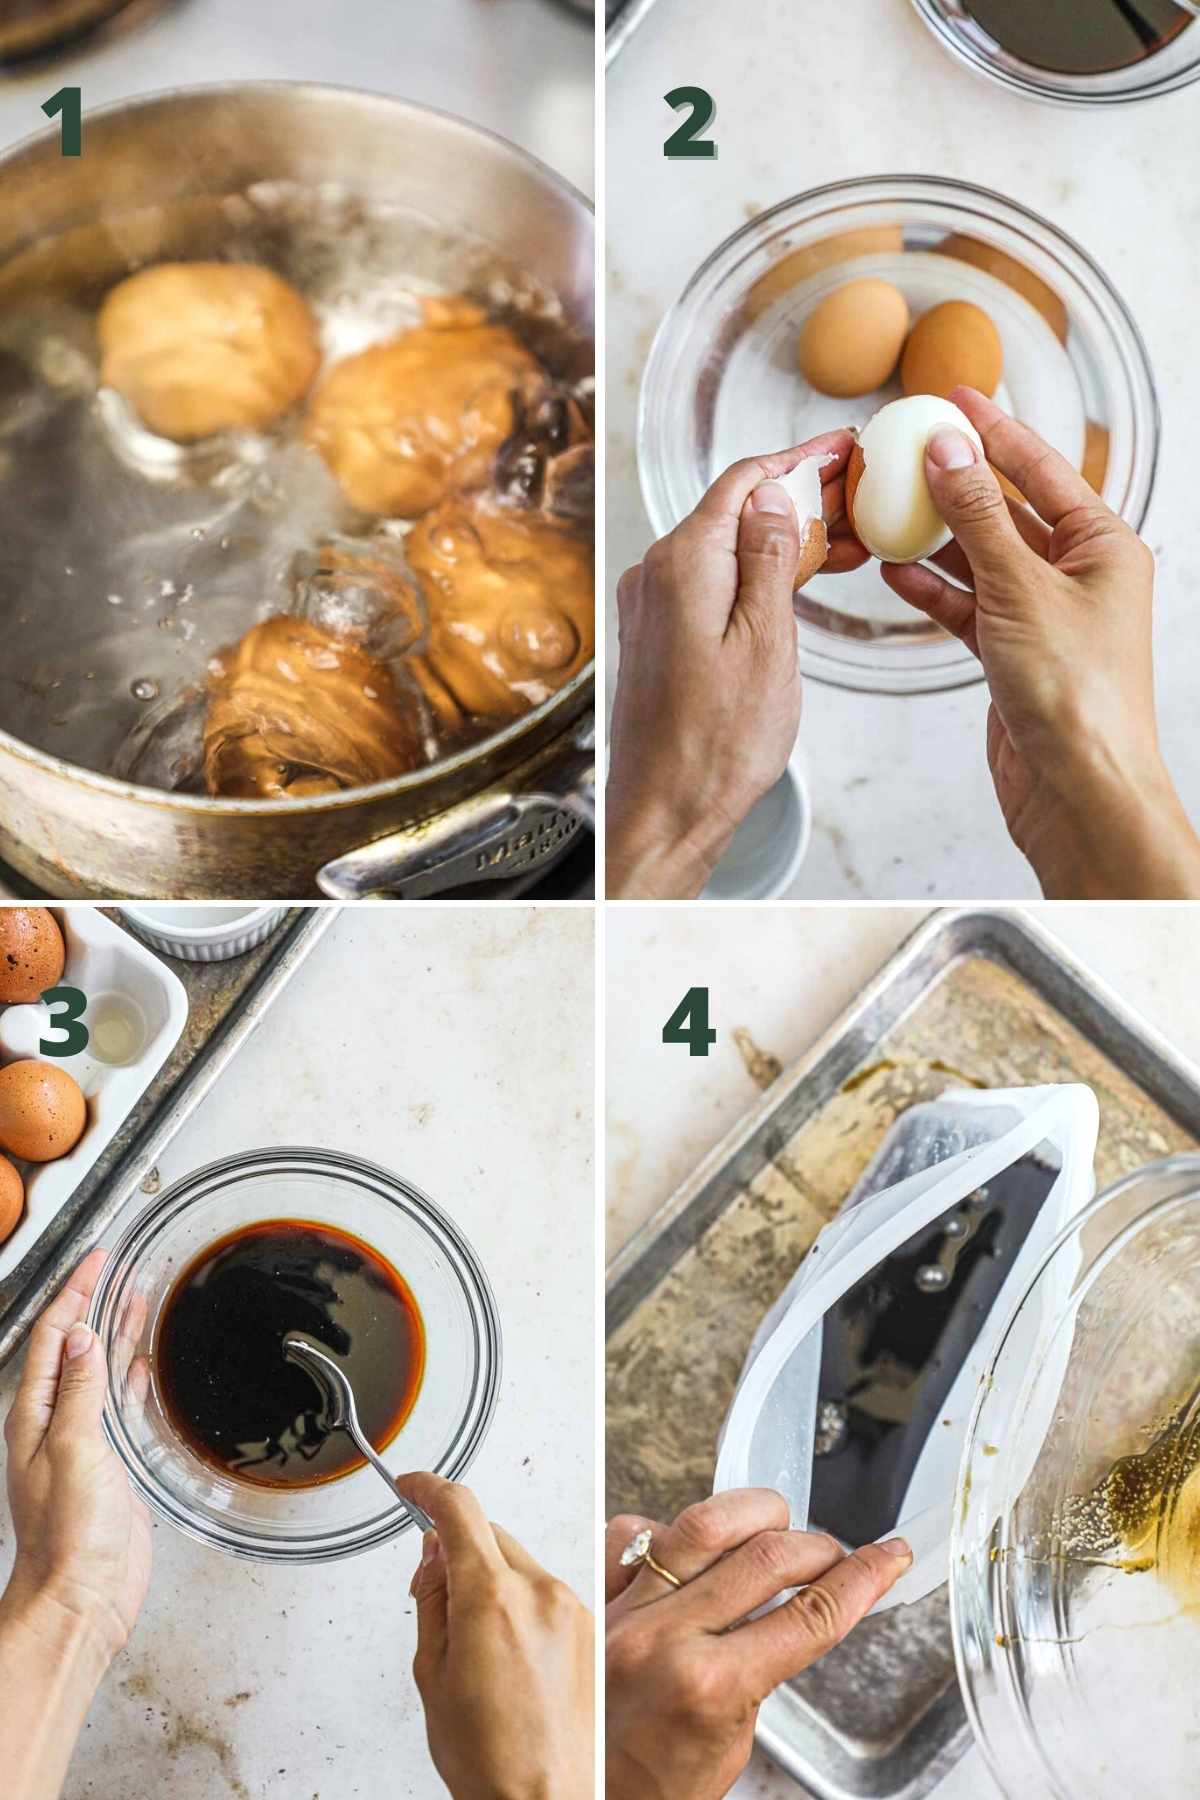 Steps to make ajitama ramen eggs, including boiling the eggs for 8 minutes, chilling the eggs, removing the shell, making the sauce, and pouring the sauce into a bag for the eggs.